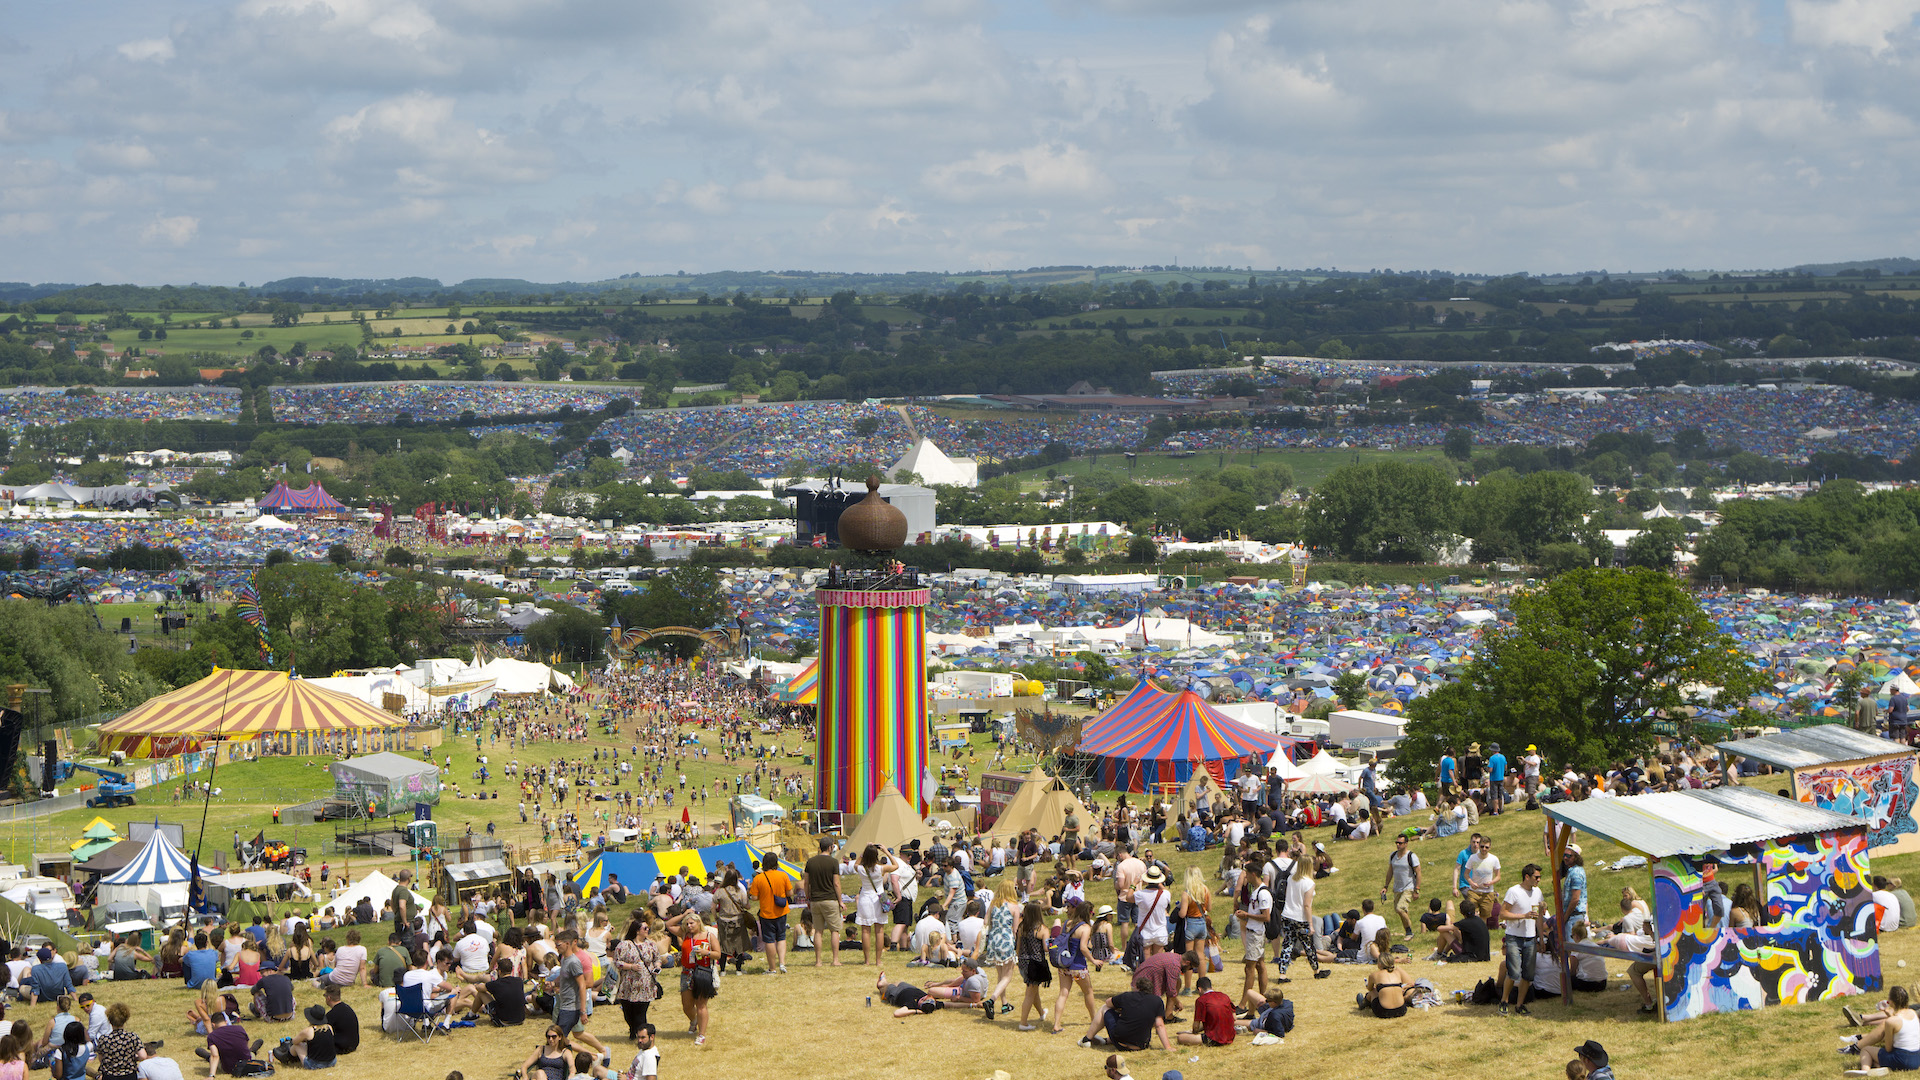 Thousands of people and tents sptretch across the fields of Glastonbury festival